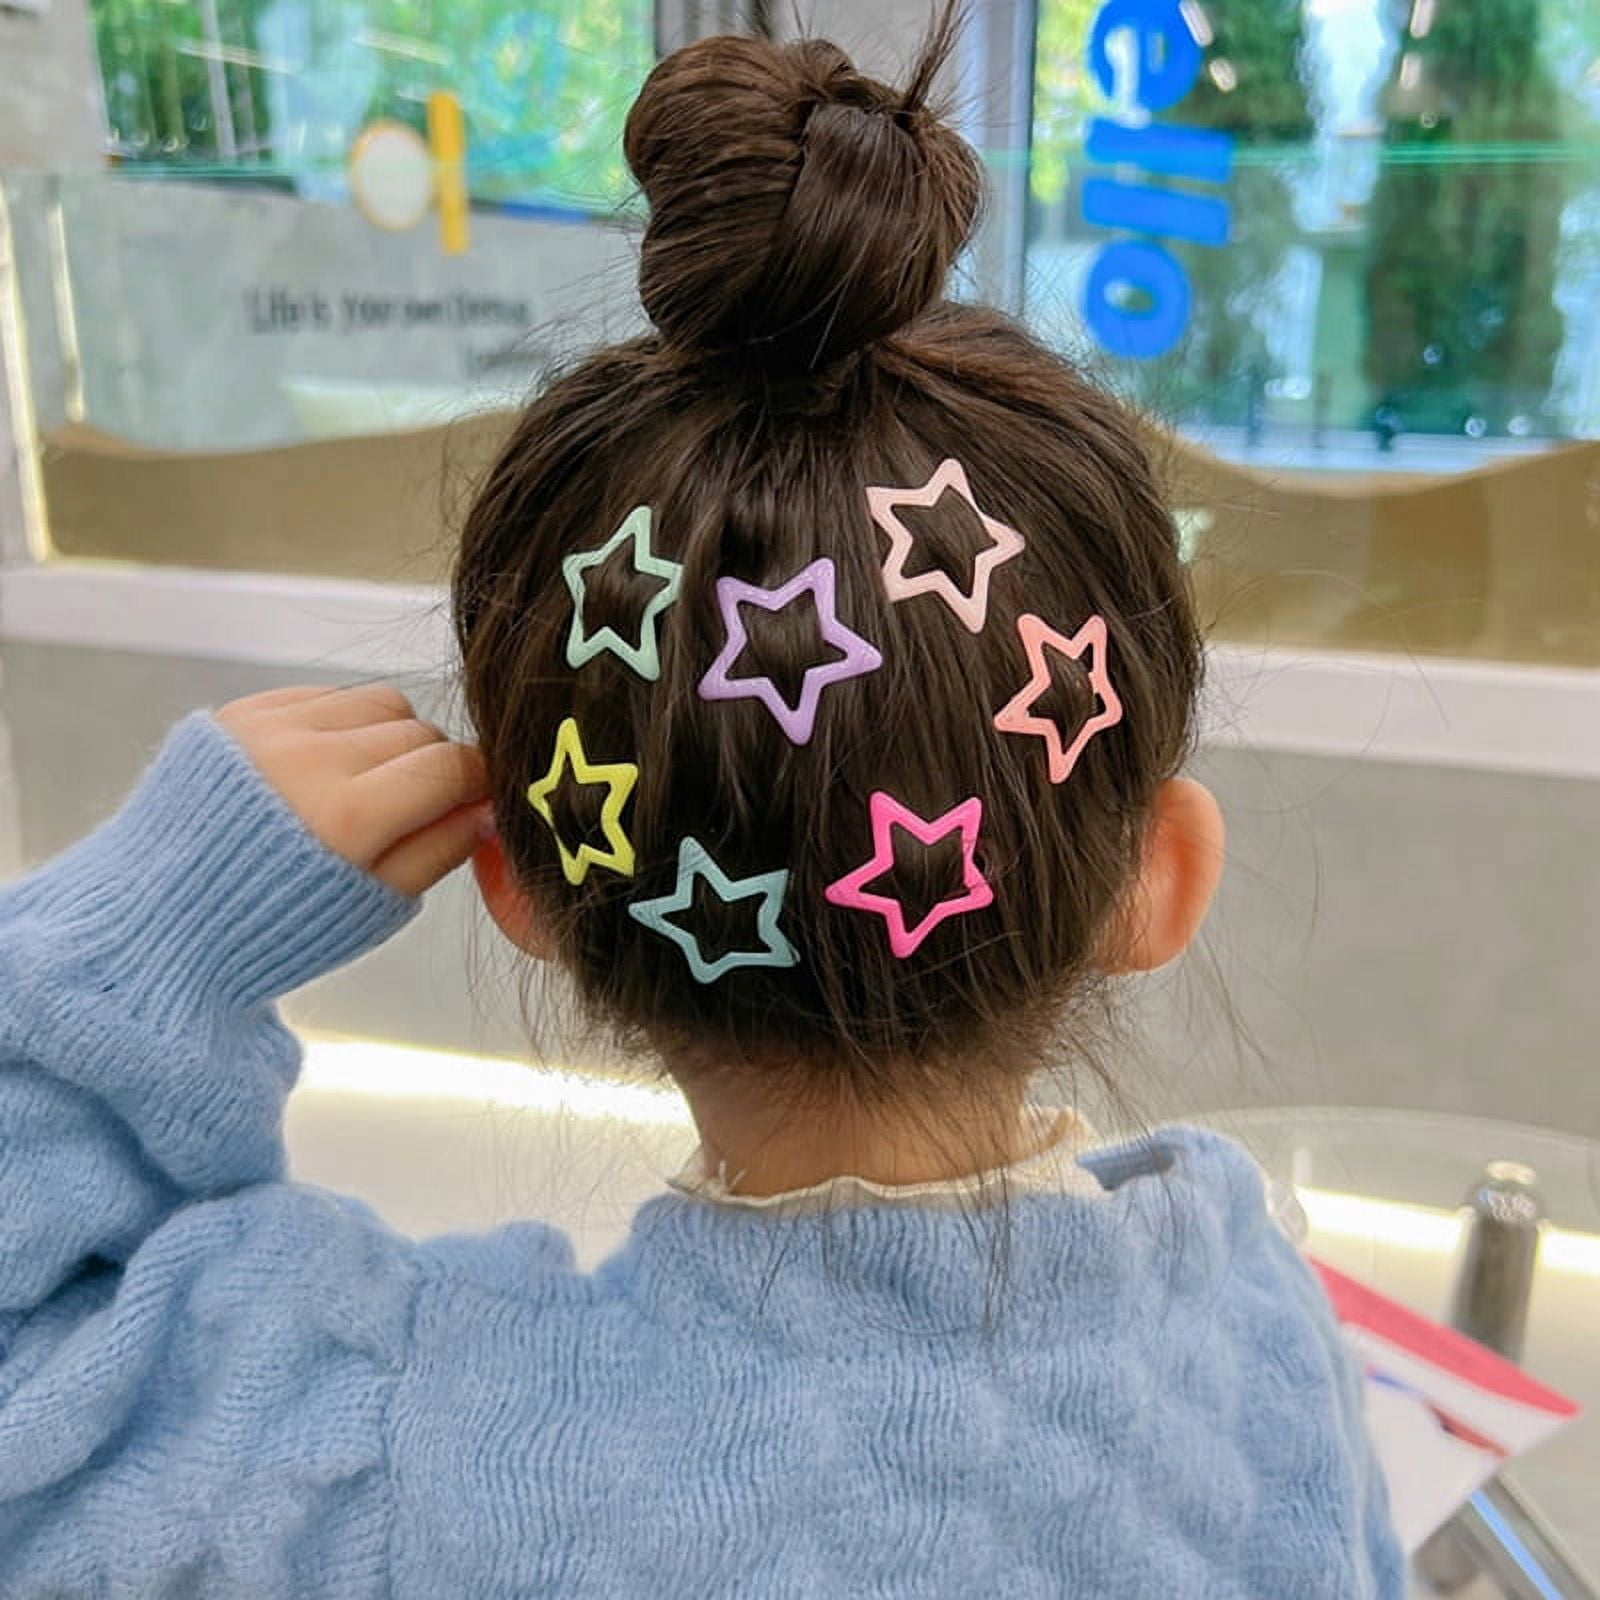 Sweet Heart Hair Clip For Girls Cute Cartoon Flower Ornament With Rabbit  And Star Design Perfect Cute Hair Clips For Baby Girls And Kids From  Starbright777, $0.49